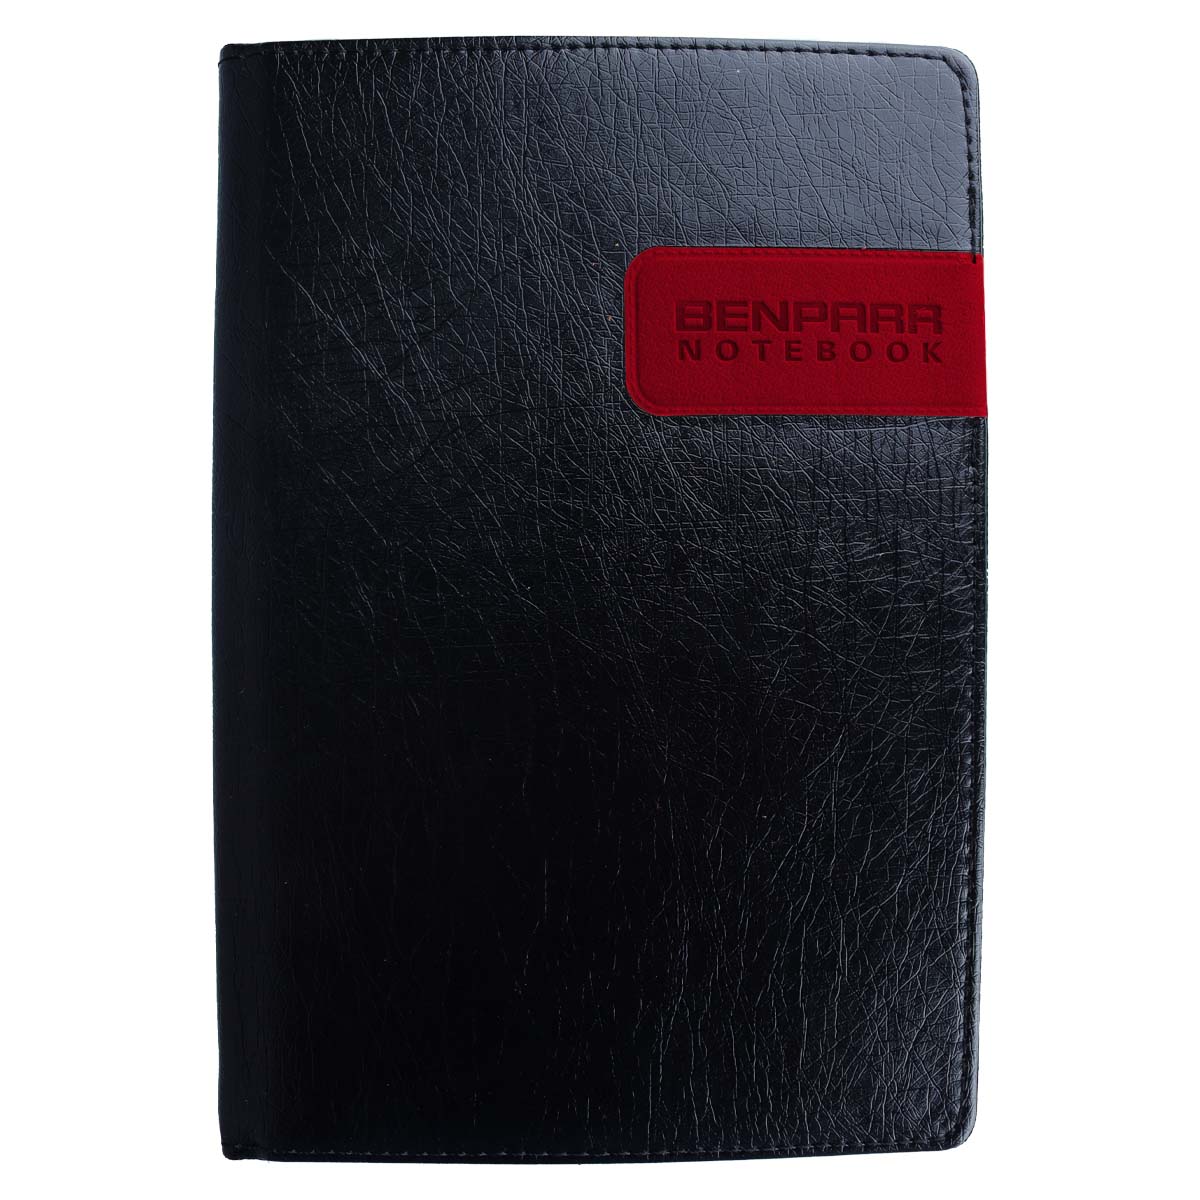 Journal Notebook PU Leather Hardcover Diary Lined